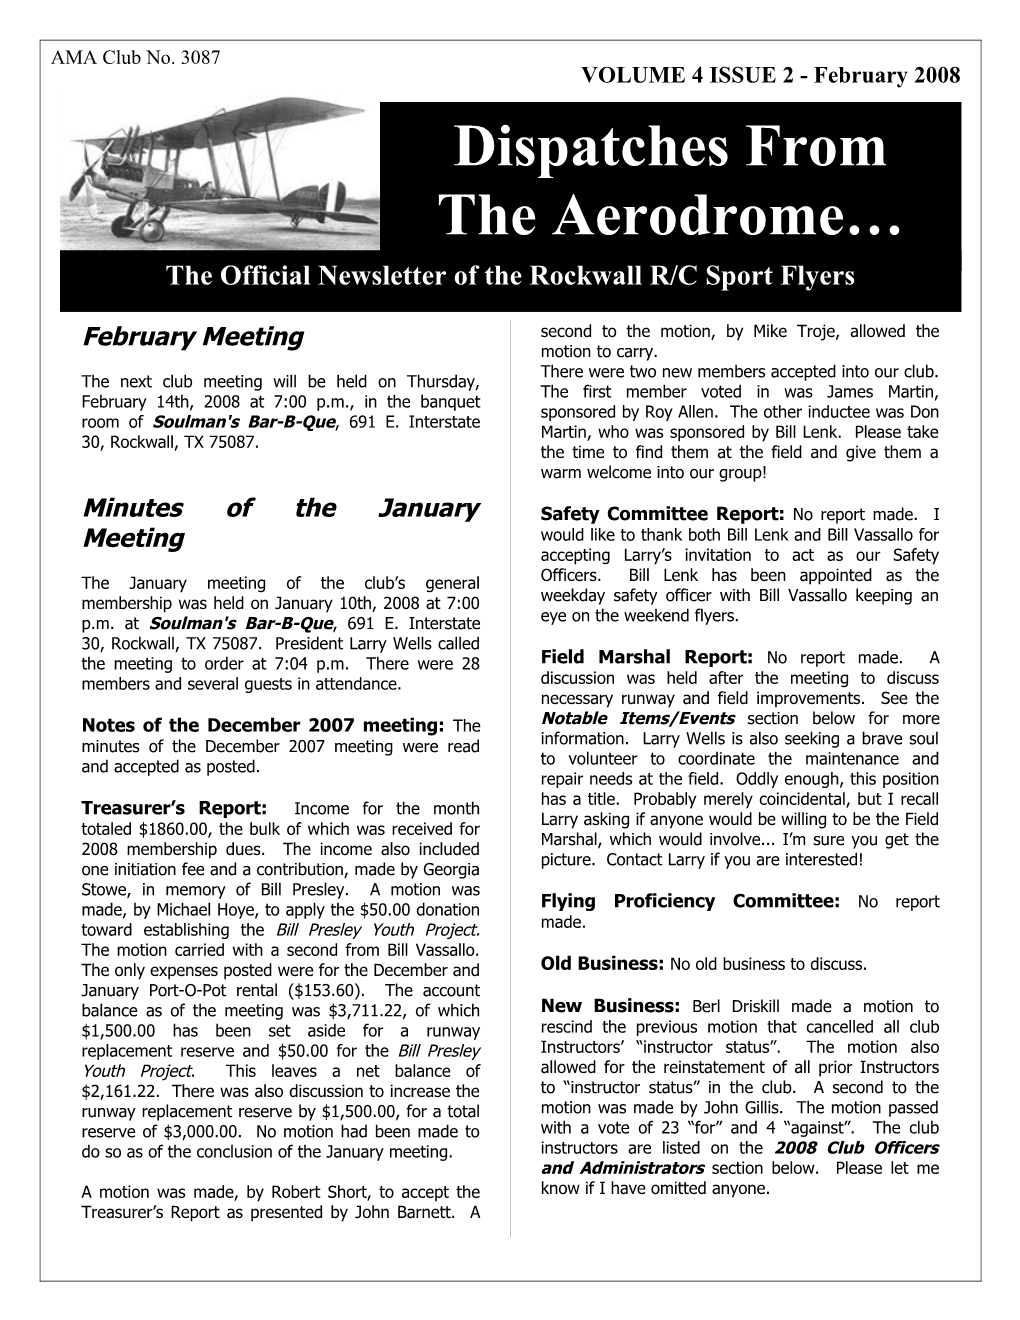 Dispatches from the Aerodrome February 2008Page 1